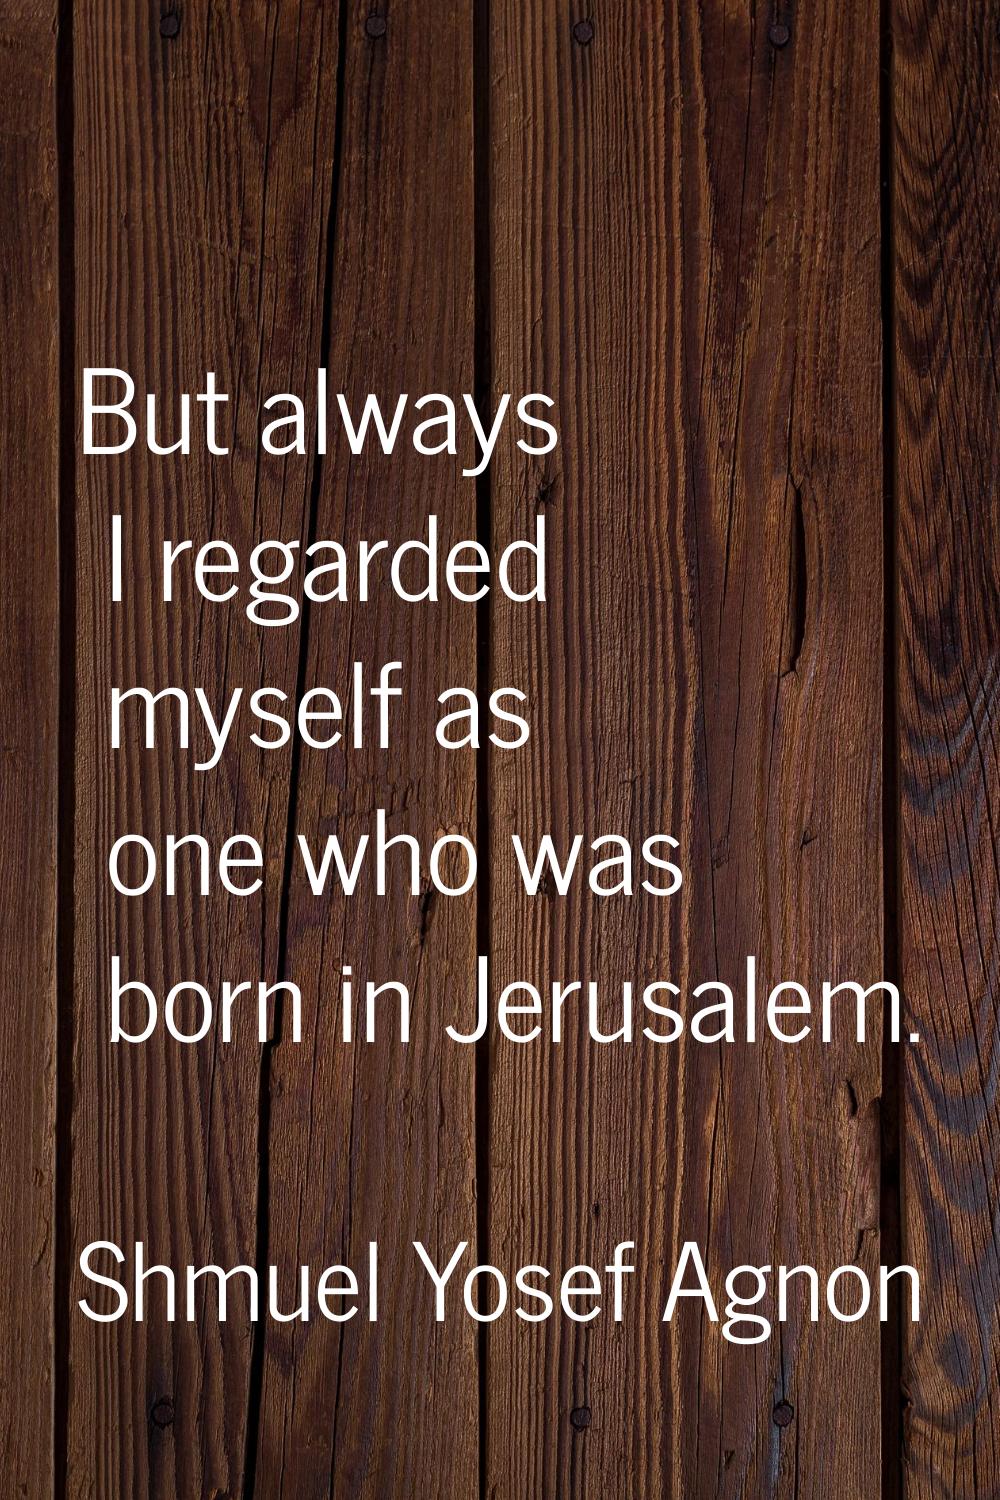 But always I regarded myself as one who was born in Jerusalem.